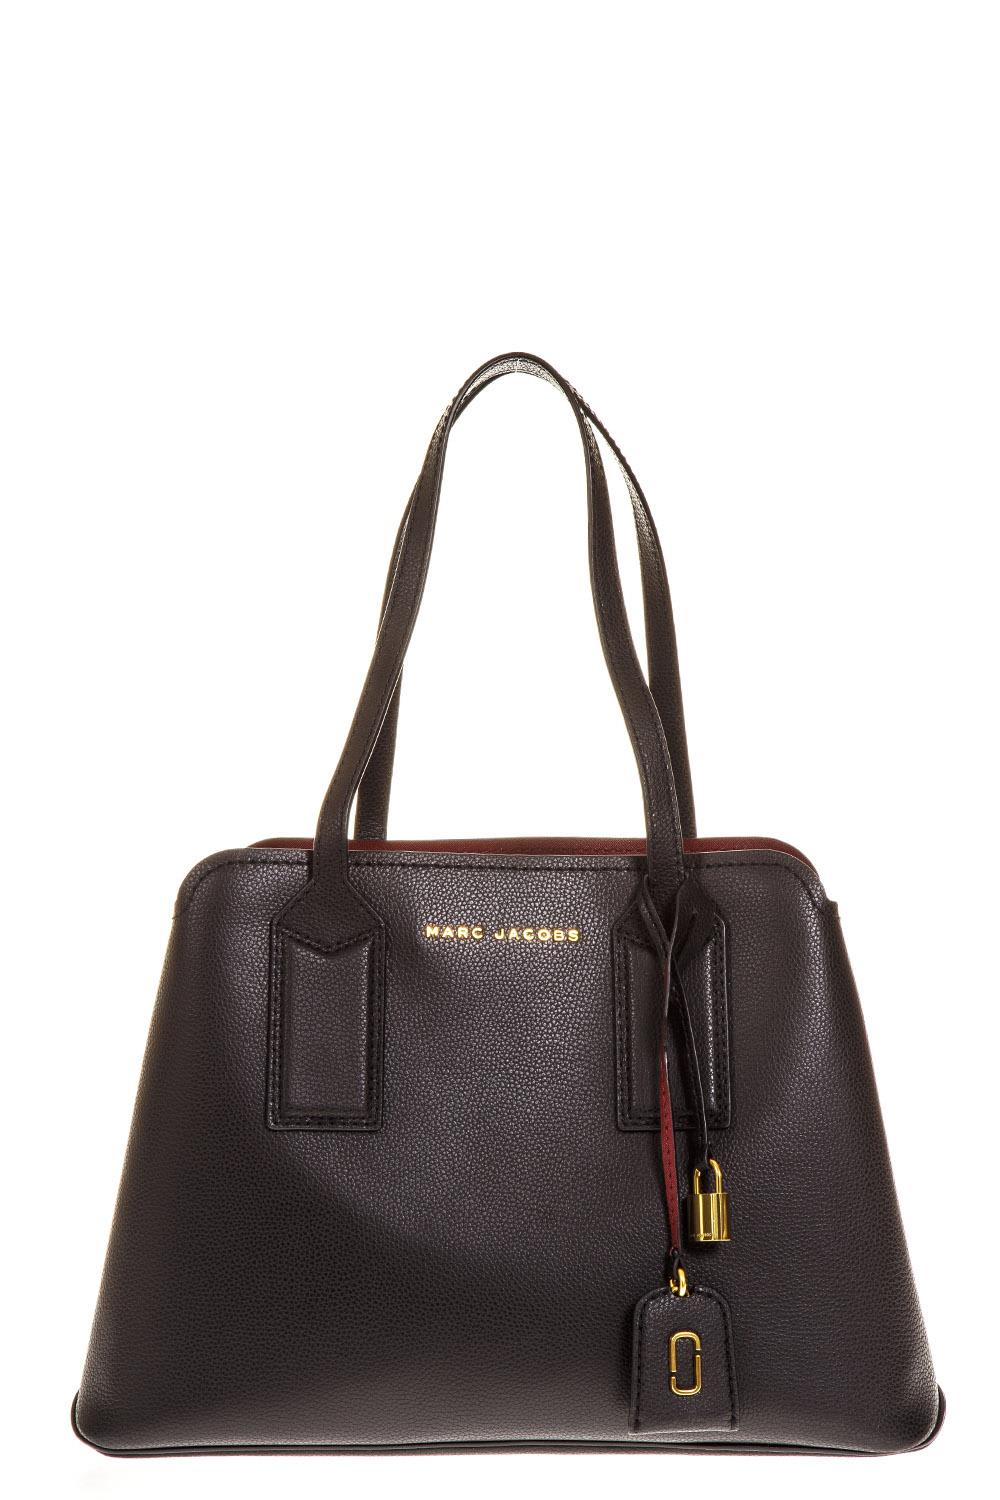 Marc Jacobs The Editor Bag Made Of Leather